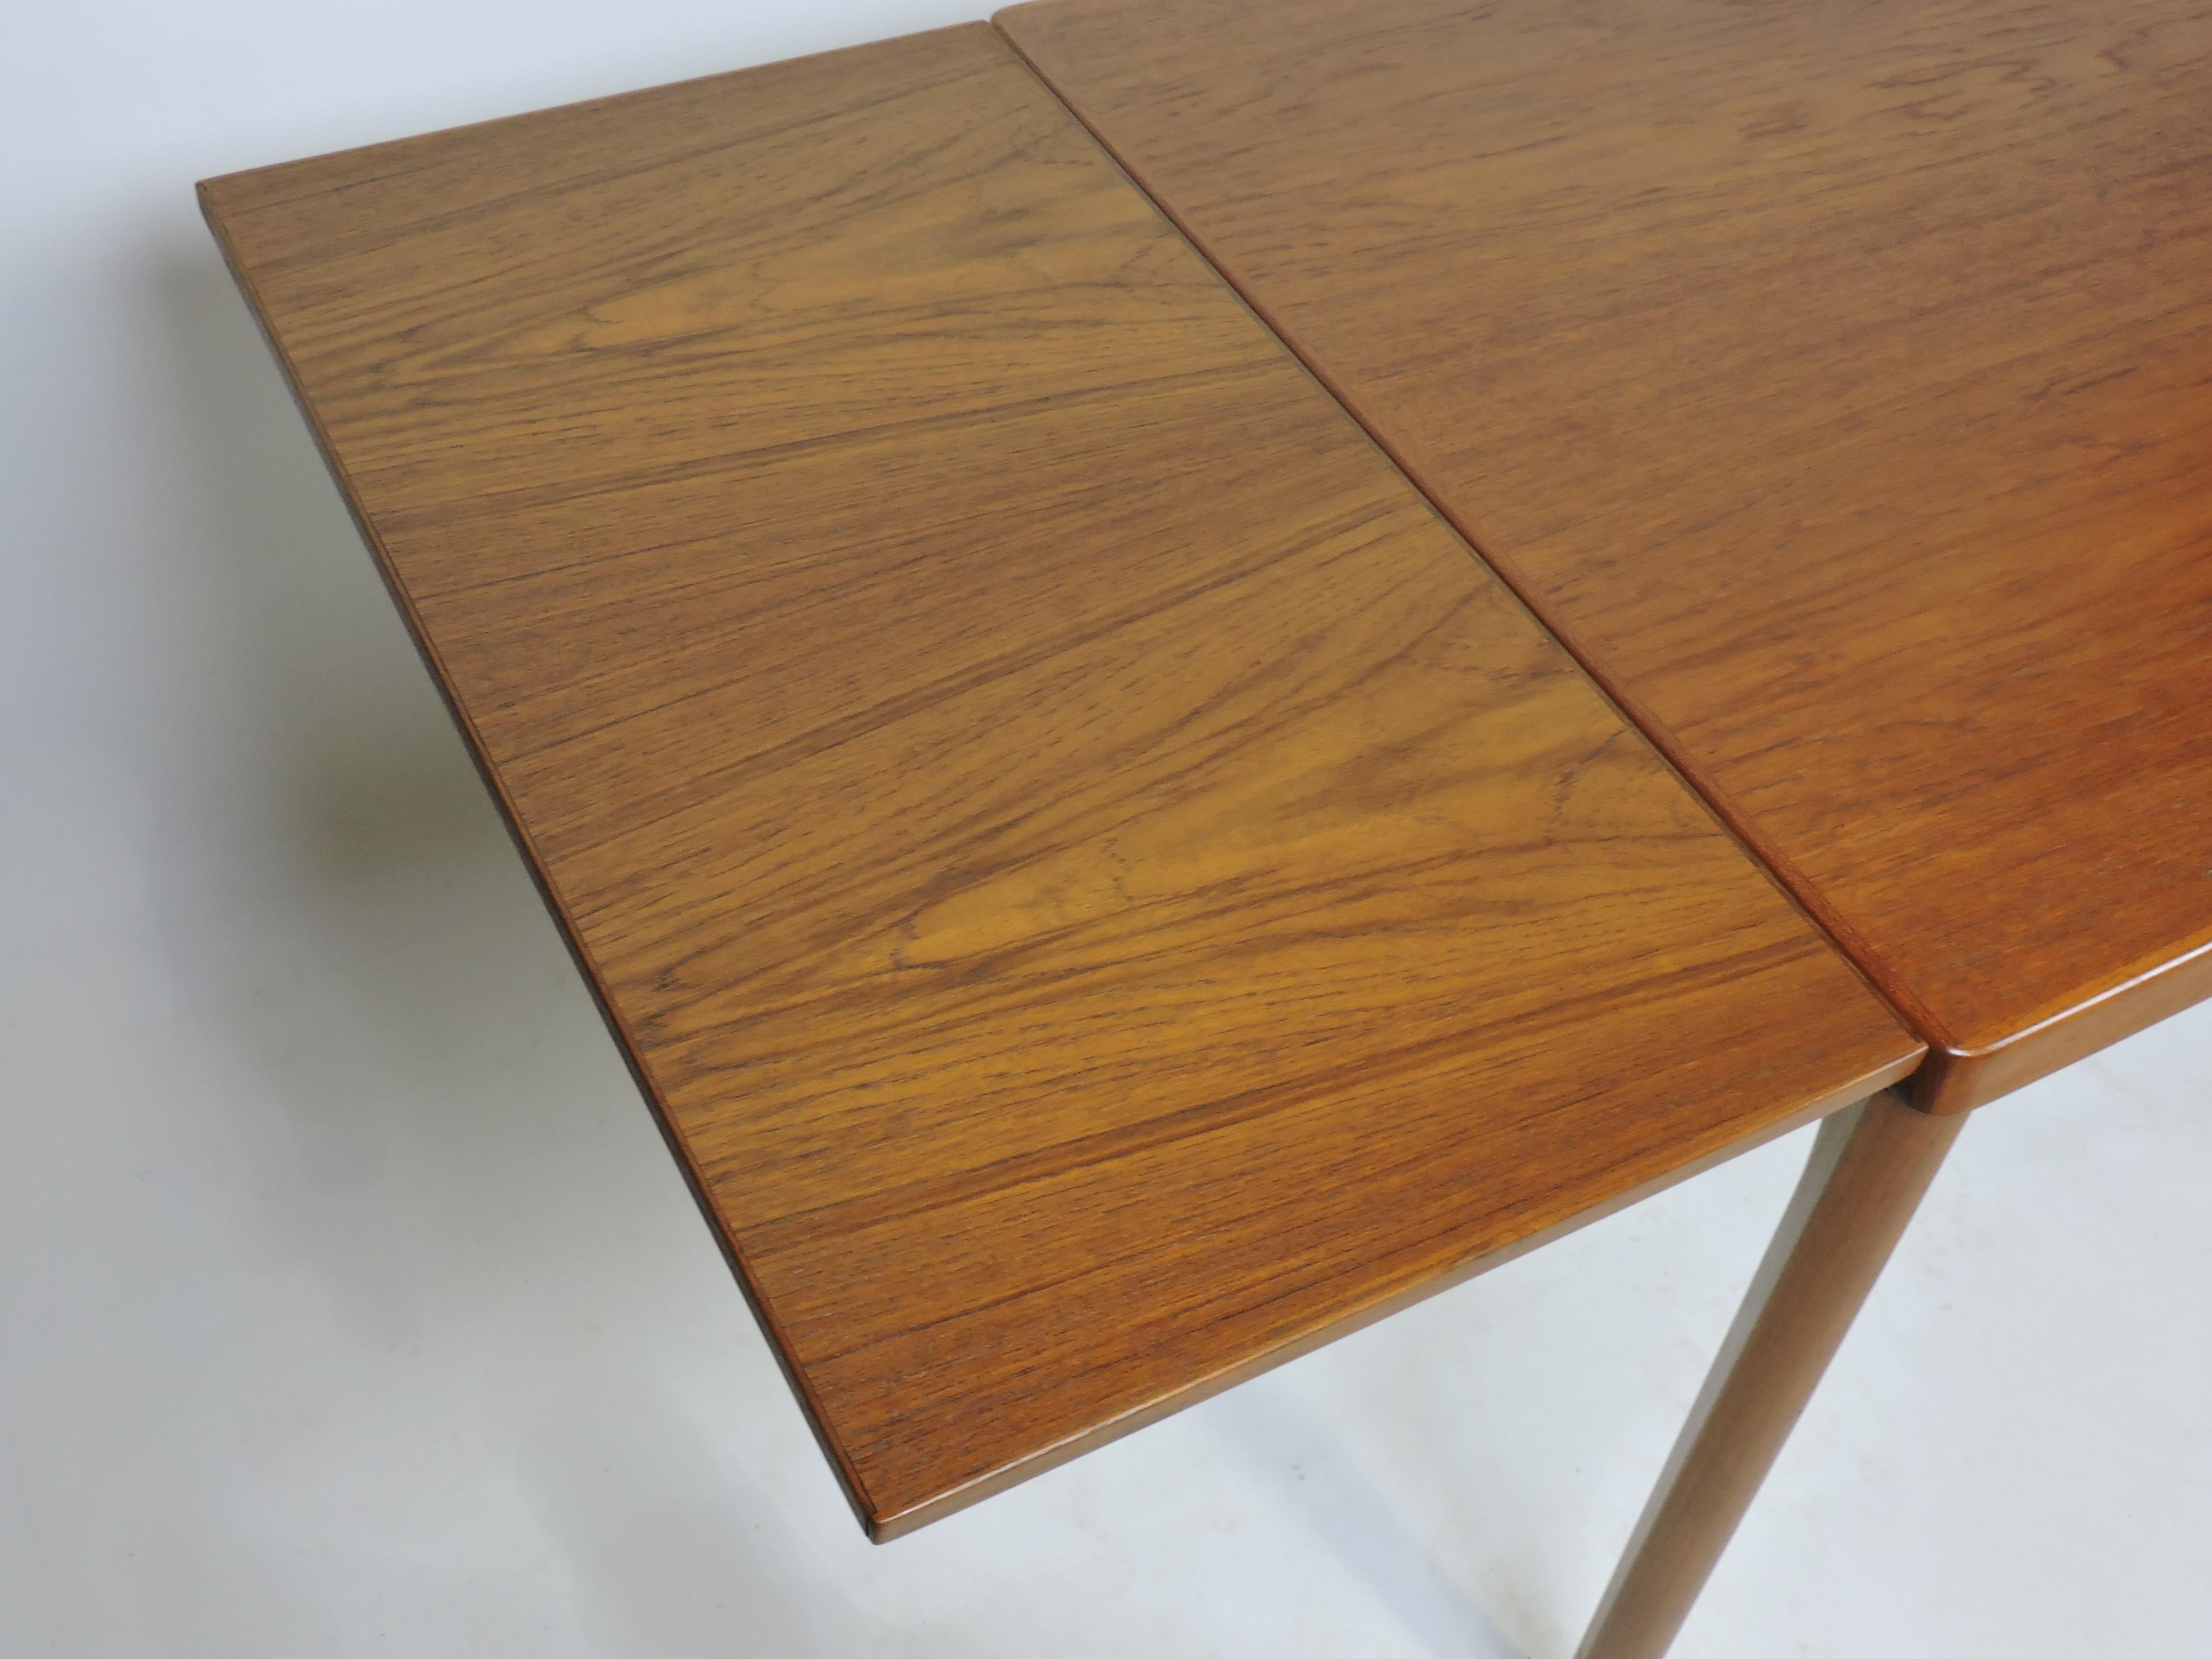 Mid-20th Century Danish Modern Teak Extendable Dining Table by Henning Kjaernulf for Vejle Stole